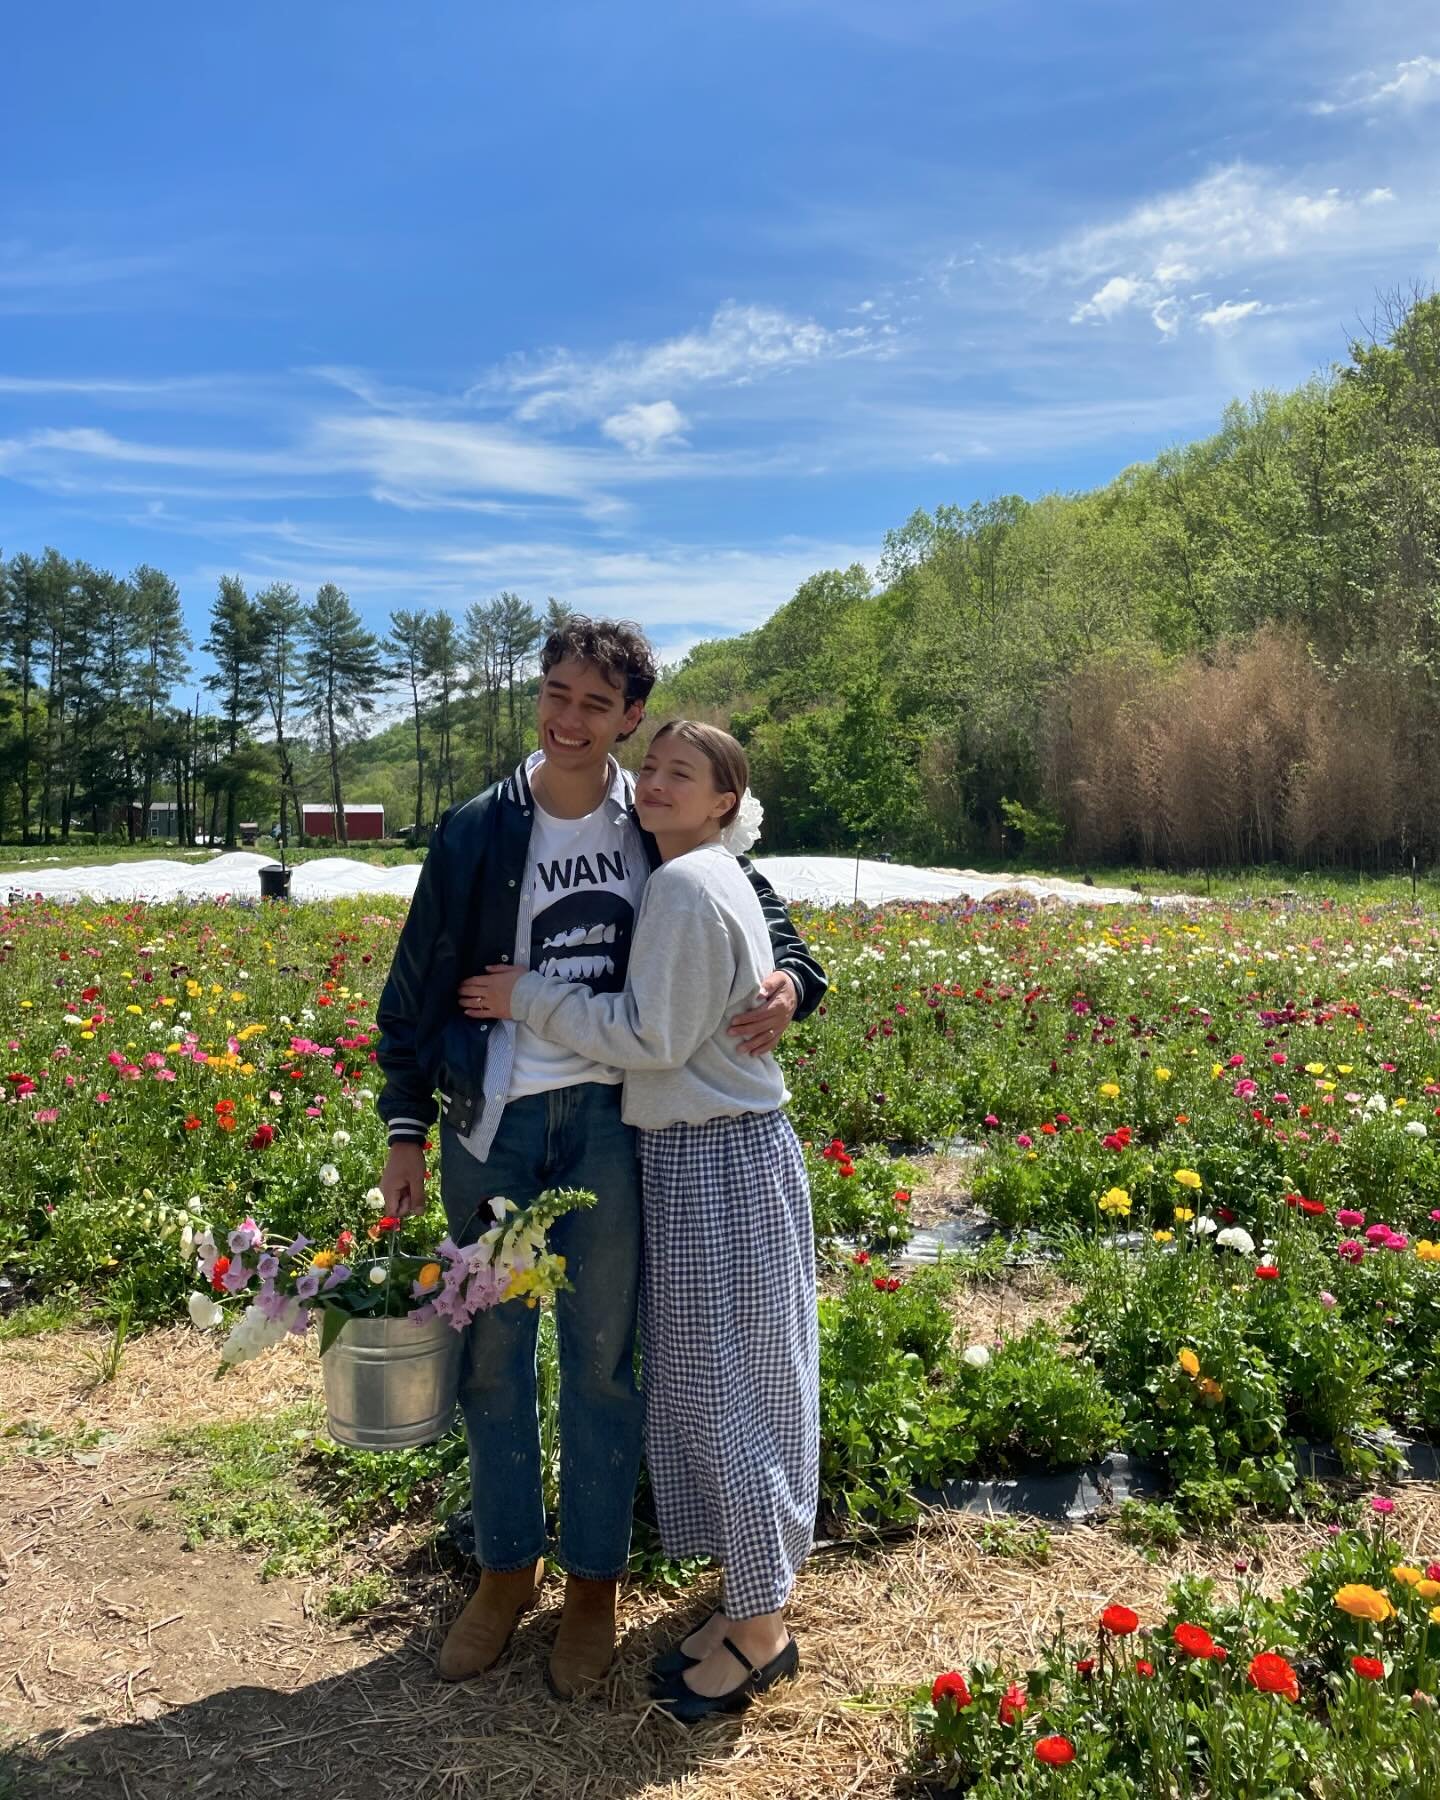 Picking flowers for Katie bday🌷🌷🌷🥲